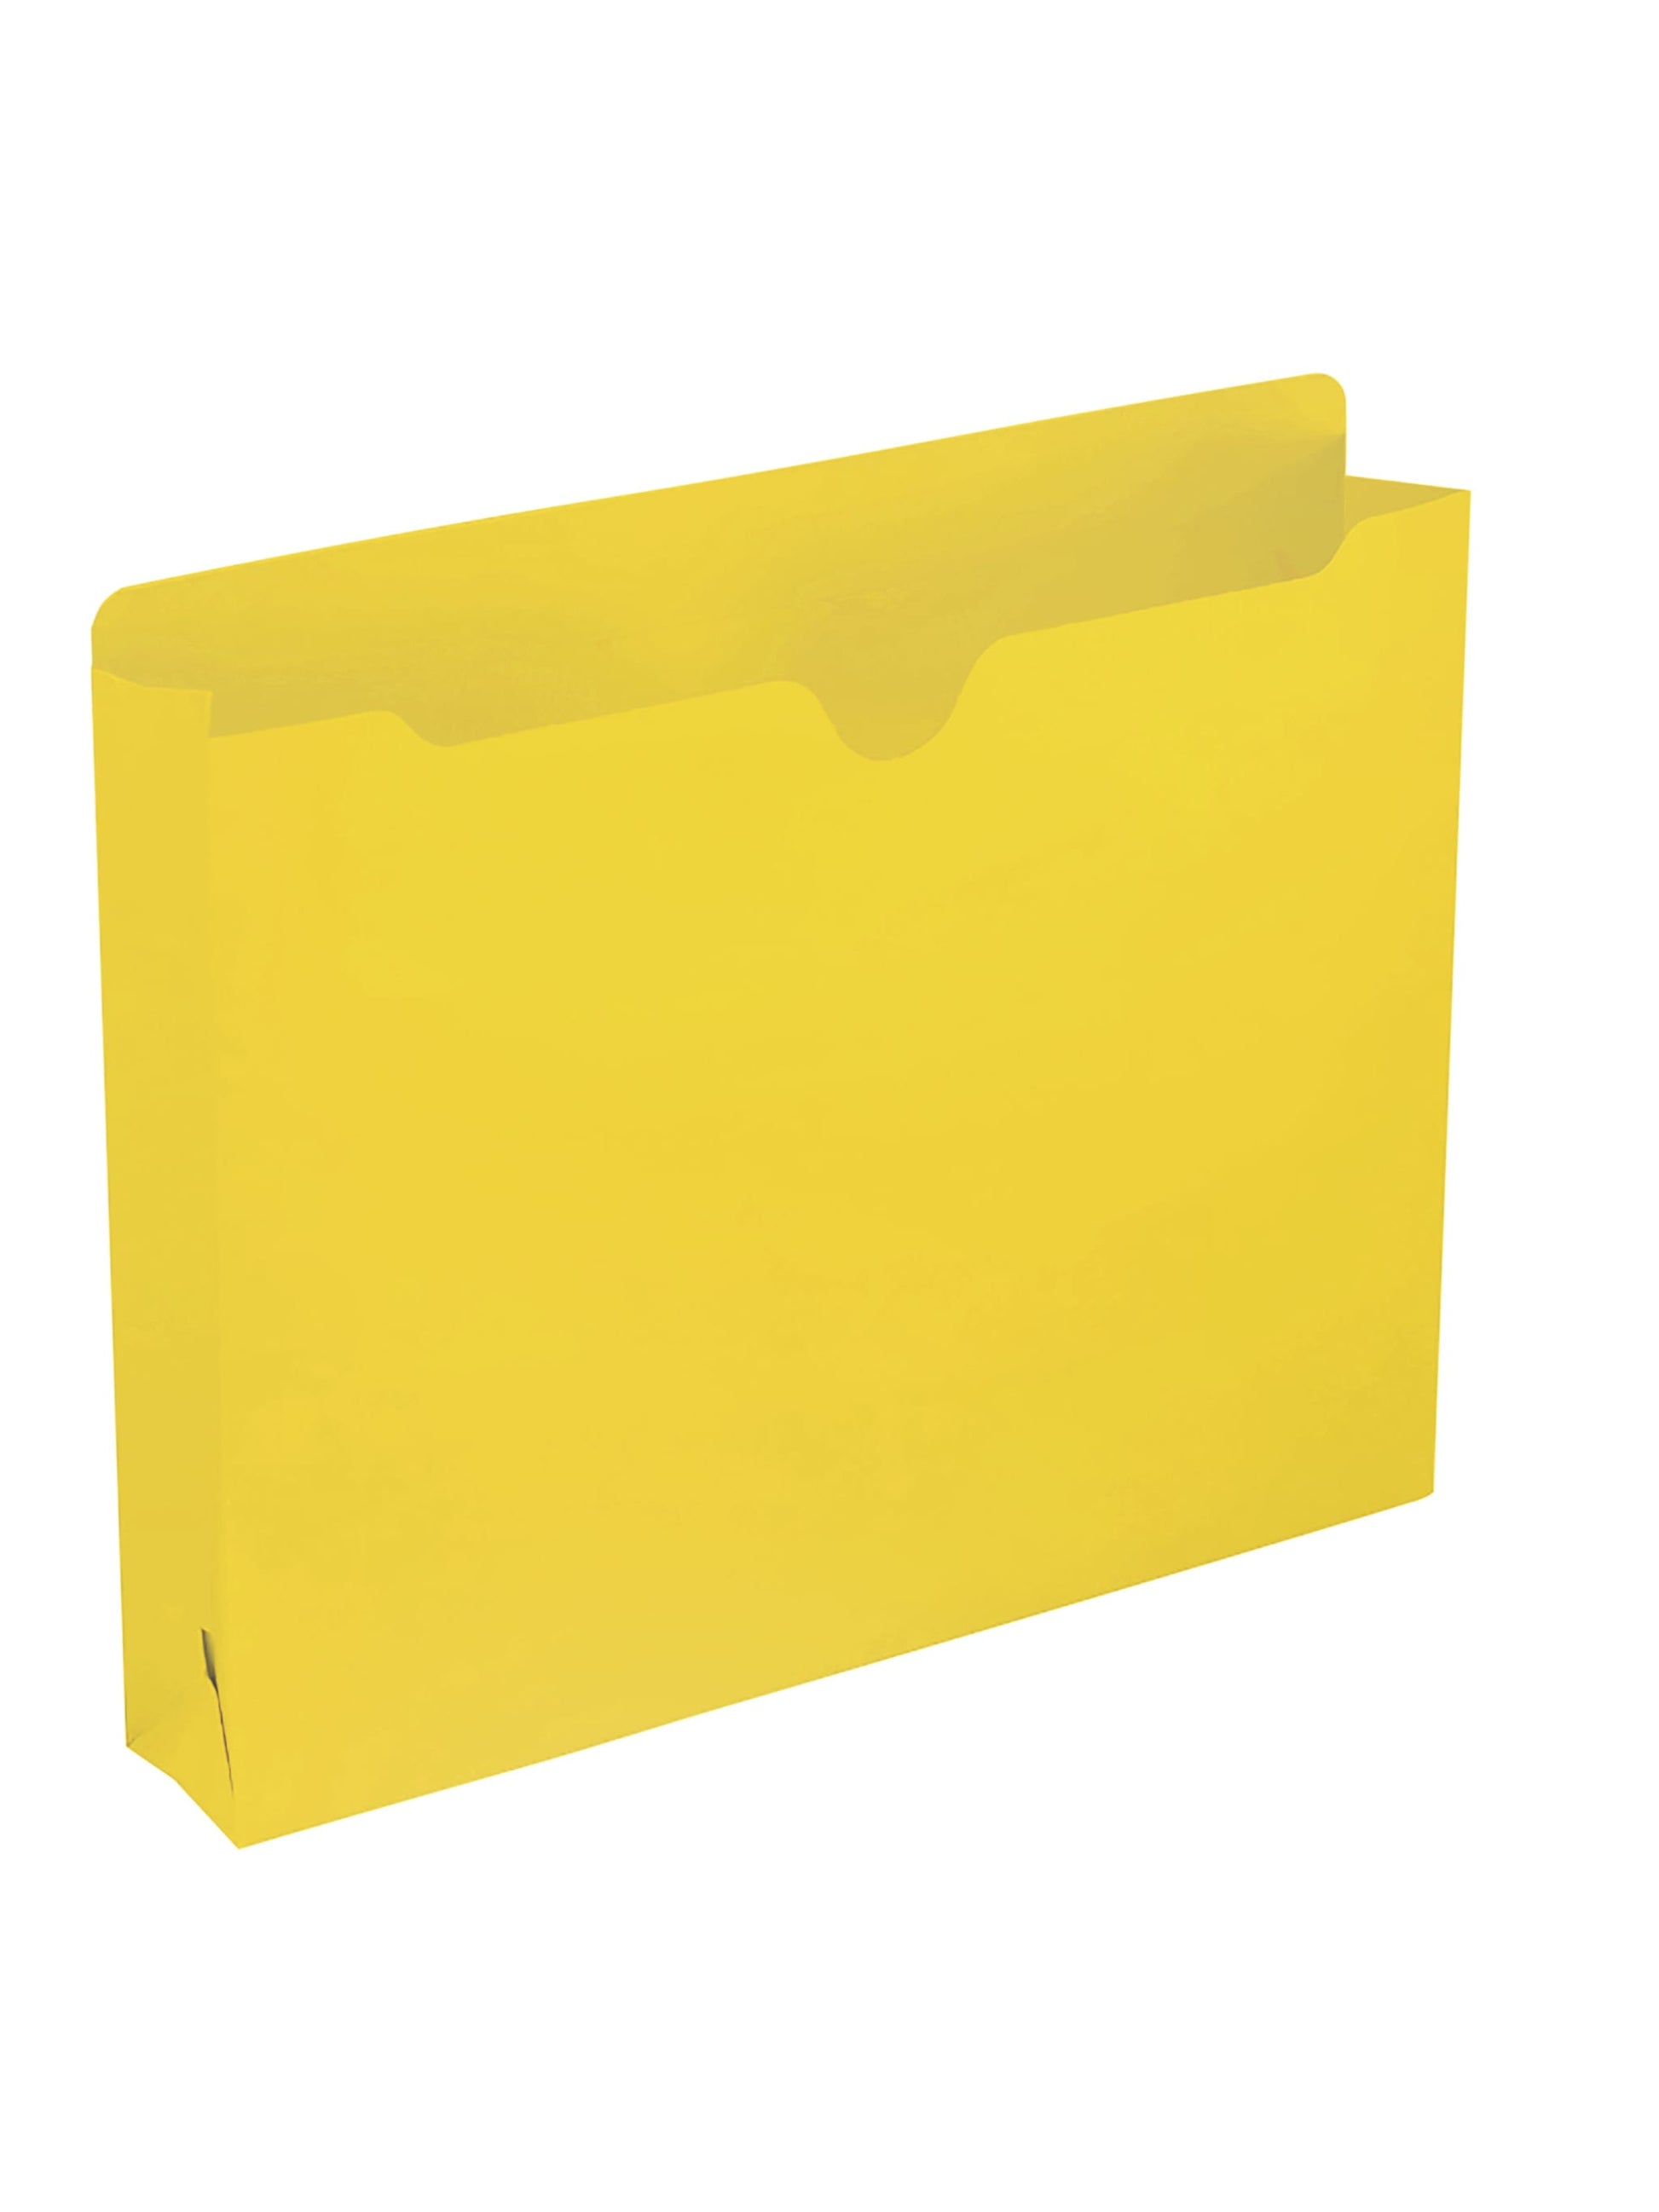 Colored File Jackets, Reinforced Straight-Cut Tab, 2 inch Expansion, Yellow Color, Letter Size, Set of 0, 30086486755710